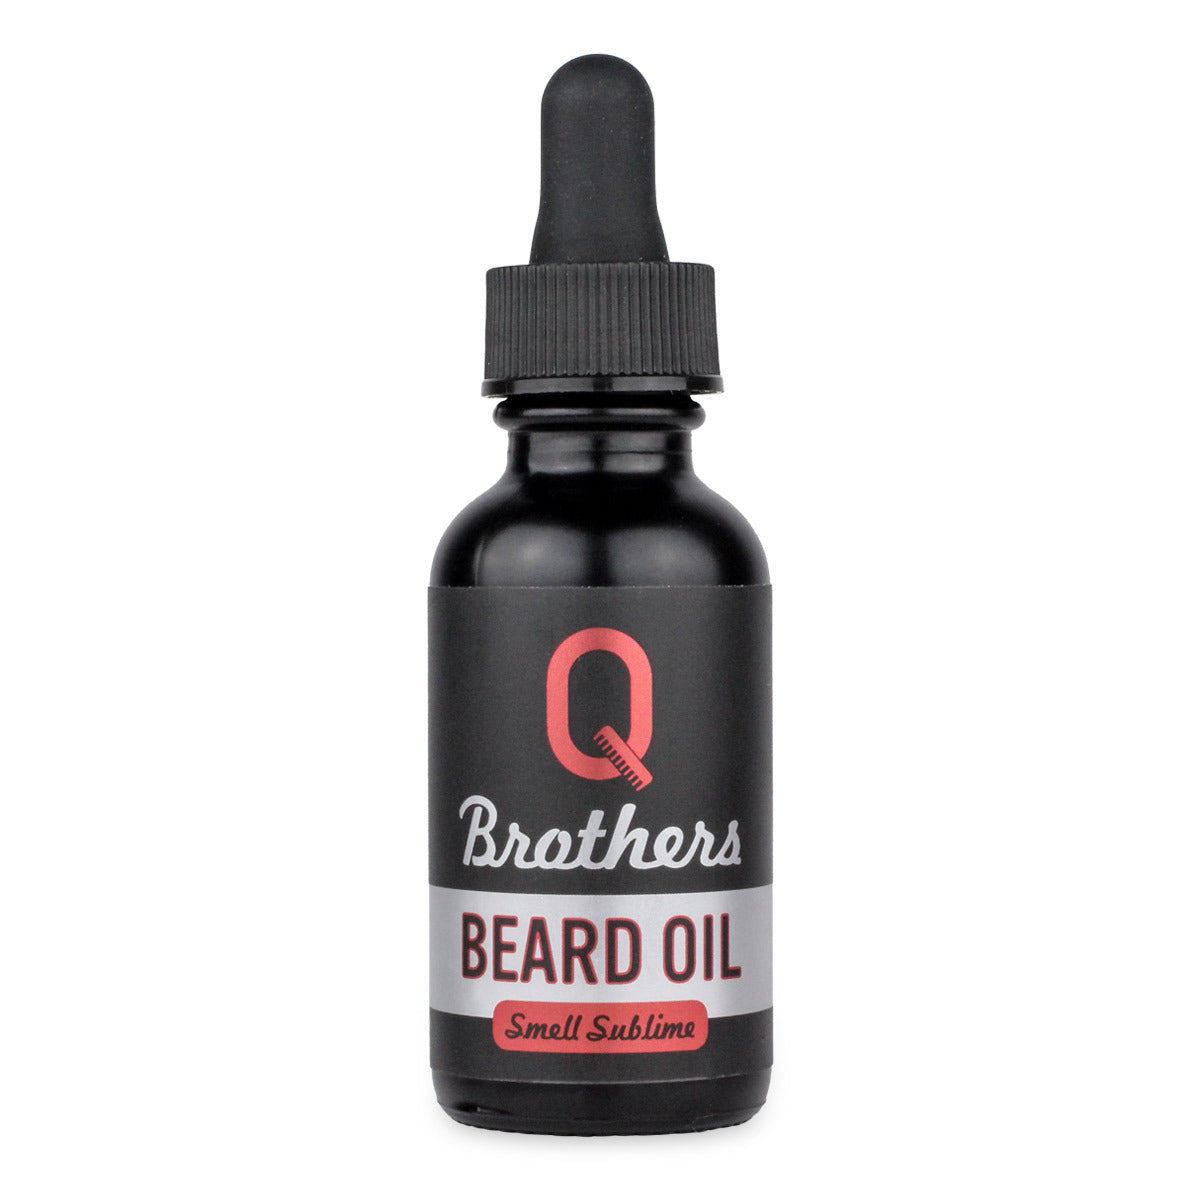 Primary image of Q Brothers Beard Oil